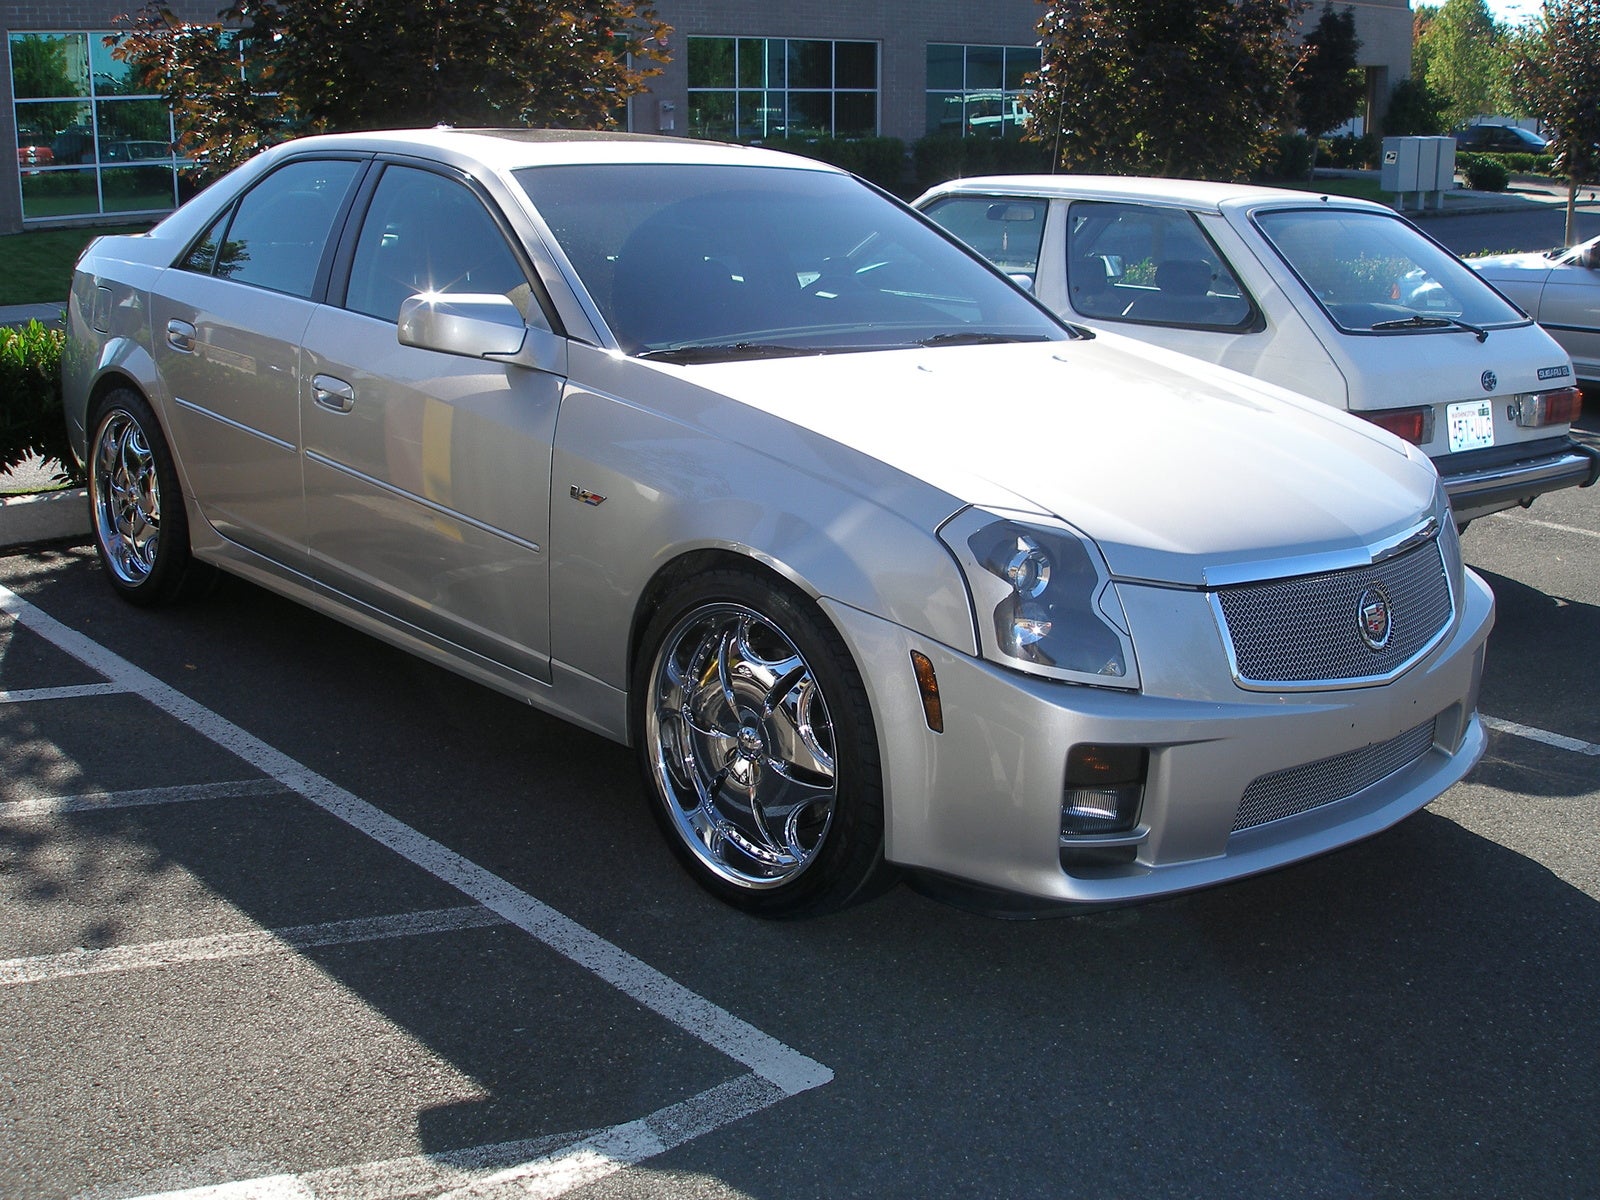 2004 Cadillac  on Rate Photo Avg 1 Vote 2004 Cadillac Cts V Base Picture View Garage